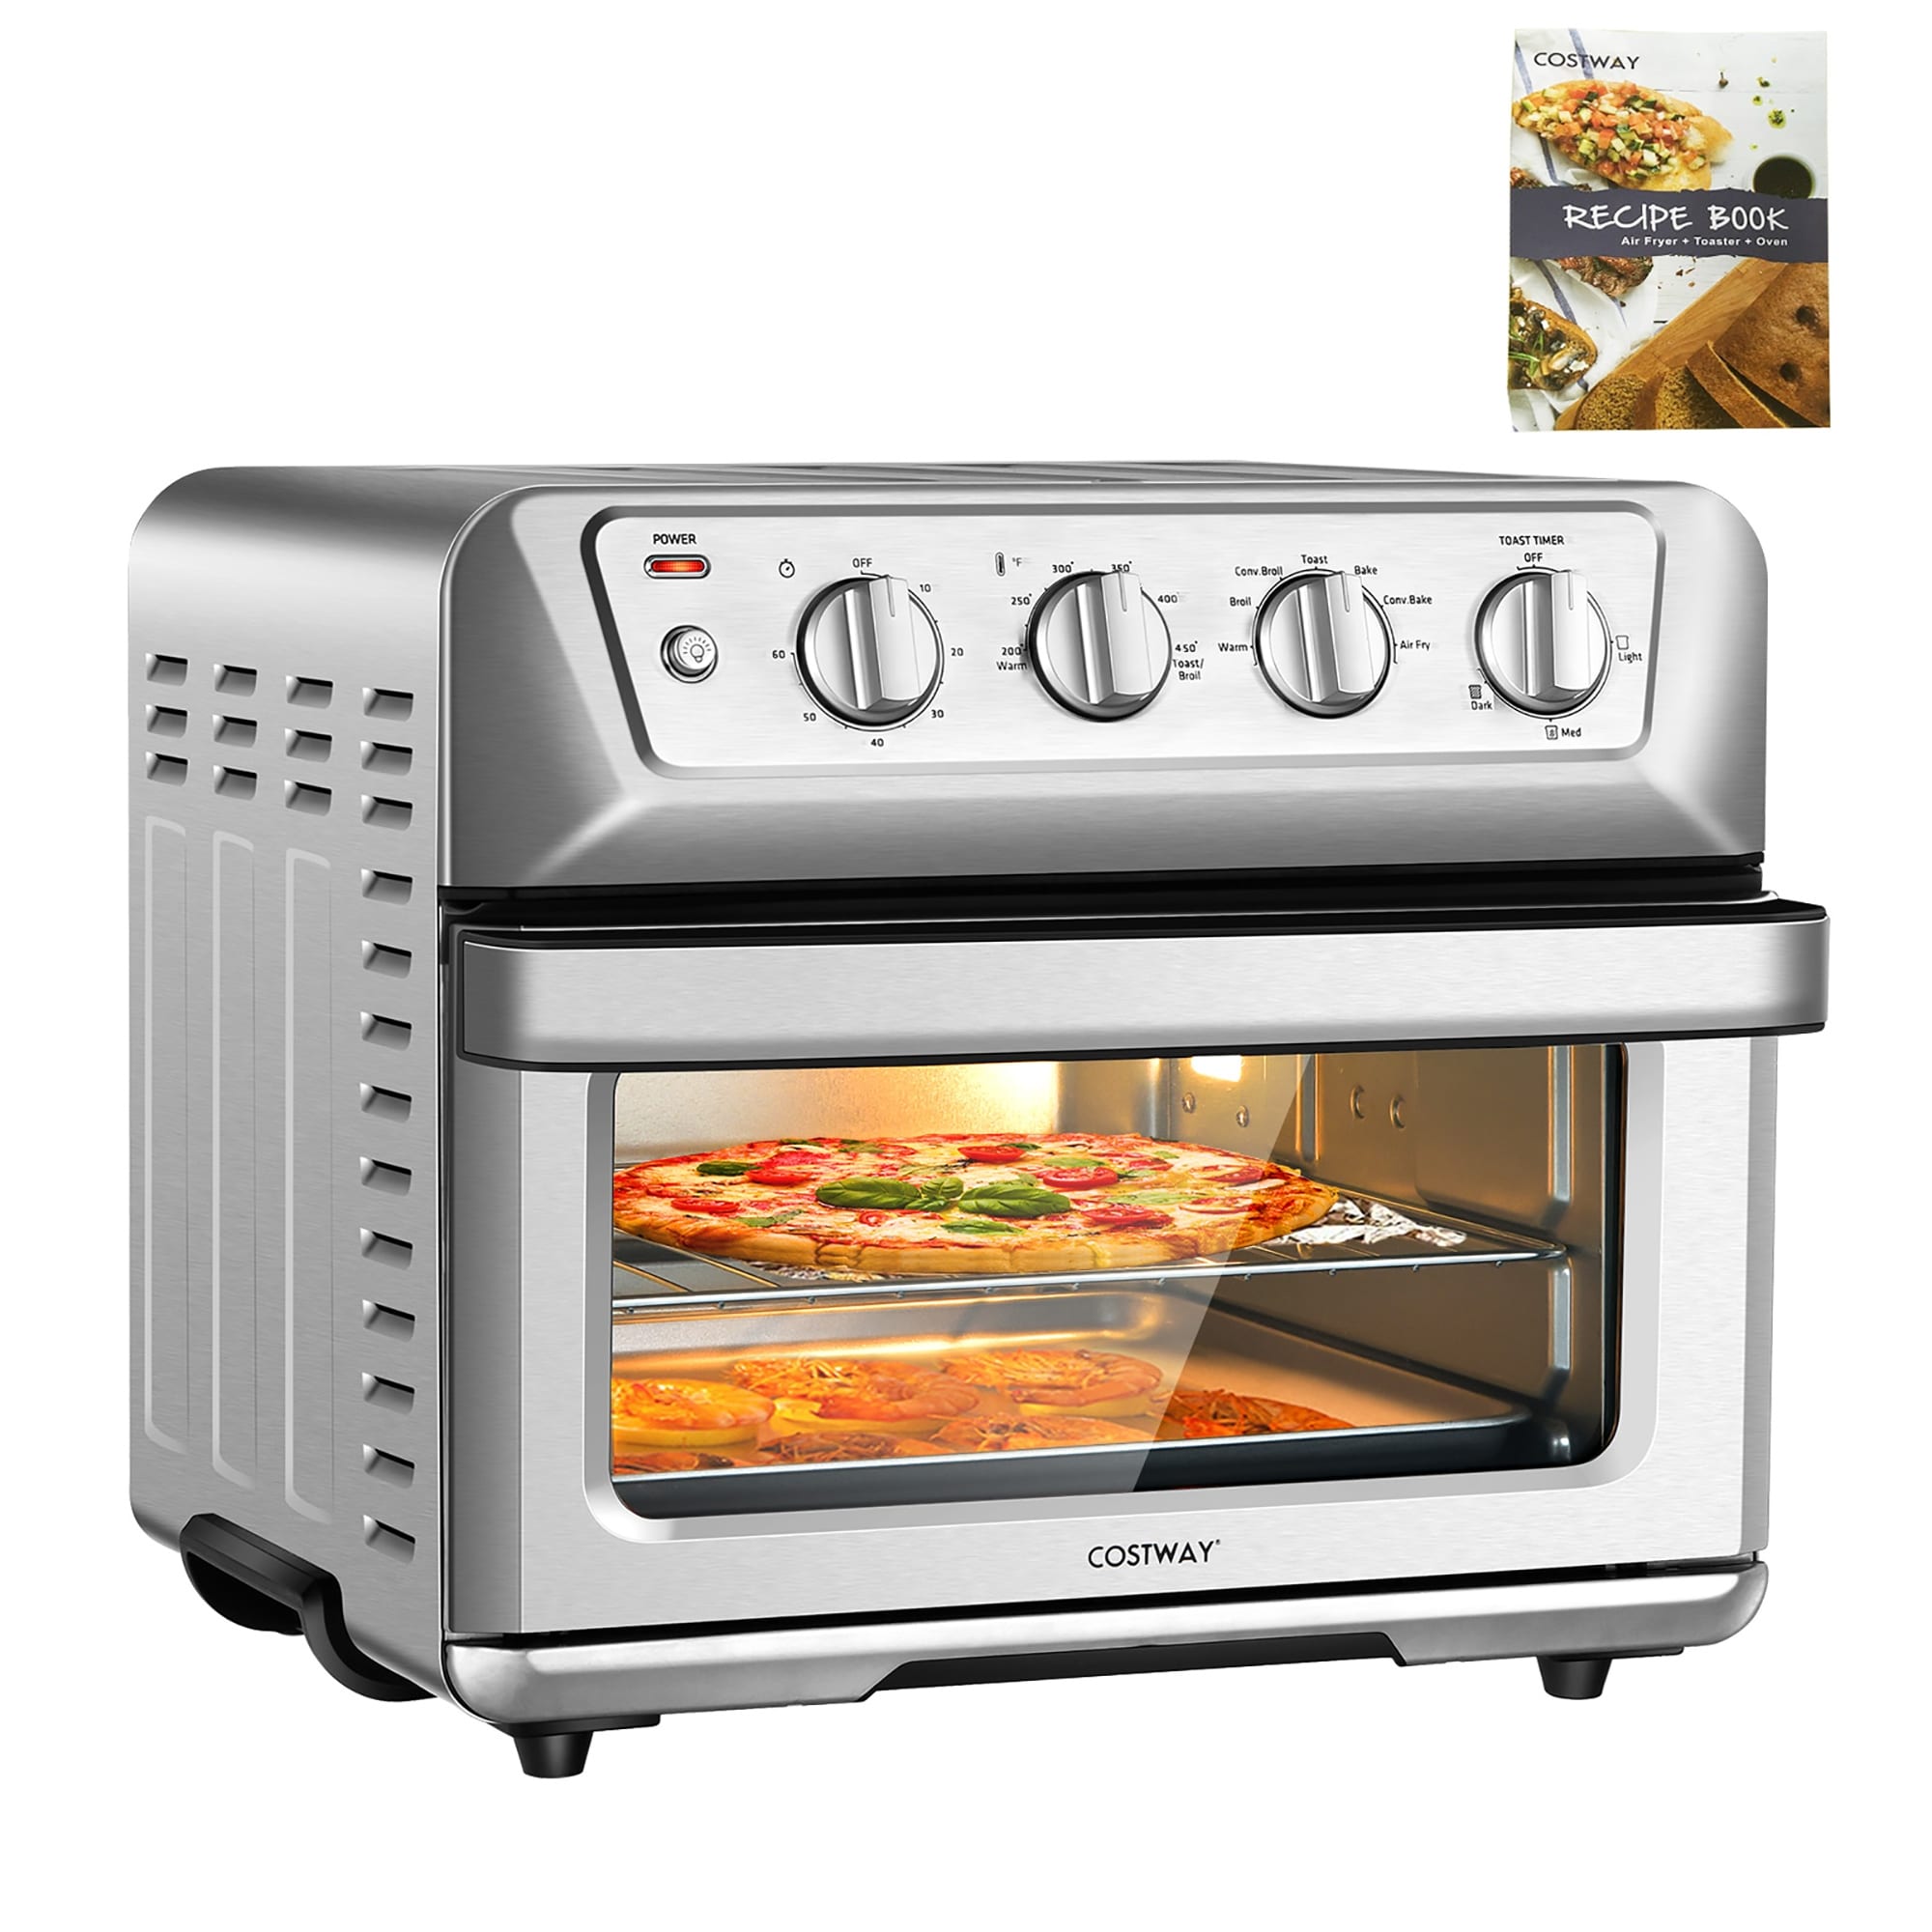 https://ak1.ostkcdn.com/images/products/is/images/direct/5bf125546373fd2c5973f7622379b11fc9ad791b/Costway-21.5QT-Air-Fryer-Toaster-Oven-1800W-Countertop-Convection-Oven.jpg